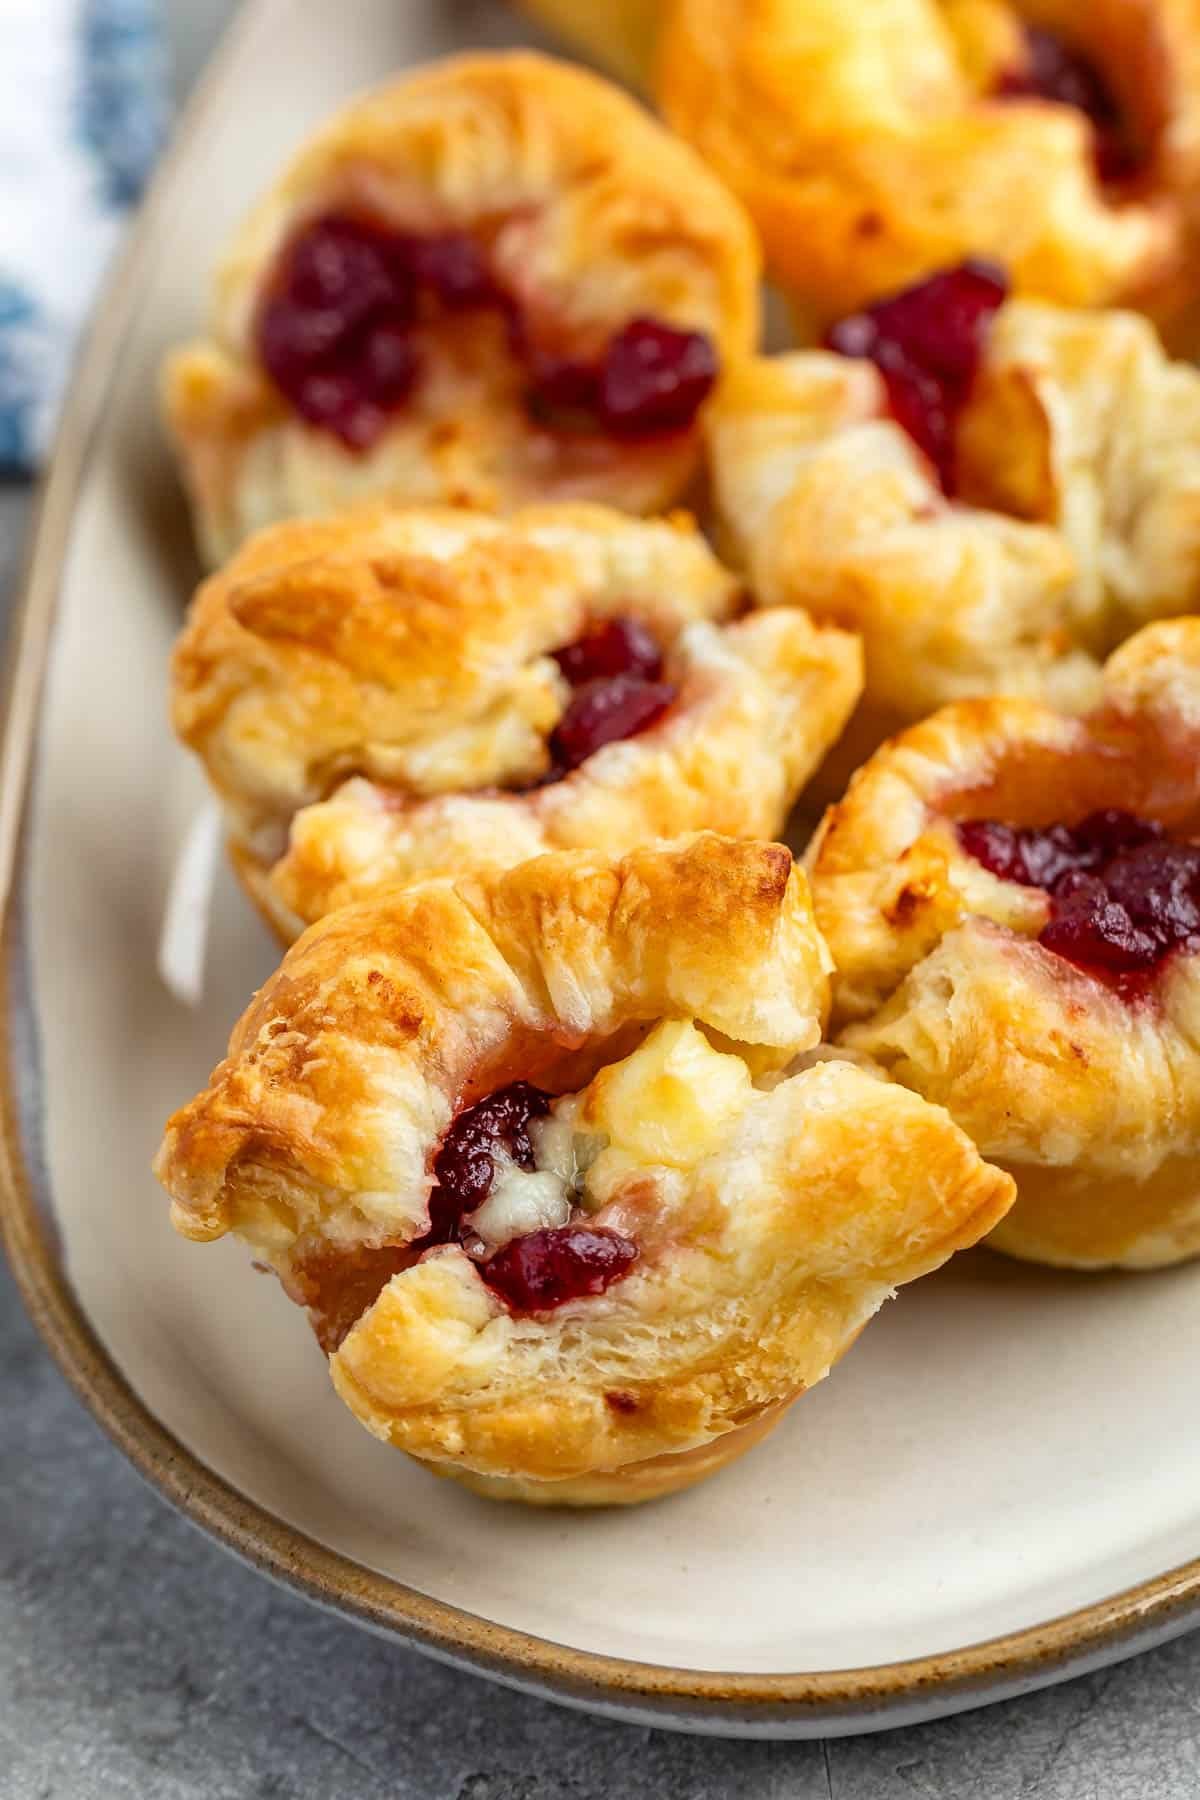 puff pastry with brie and cranberry baked in the middle on a grey plate.